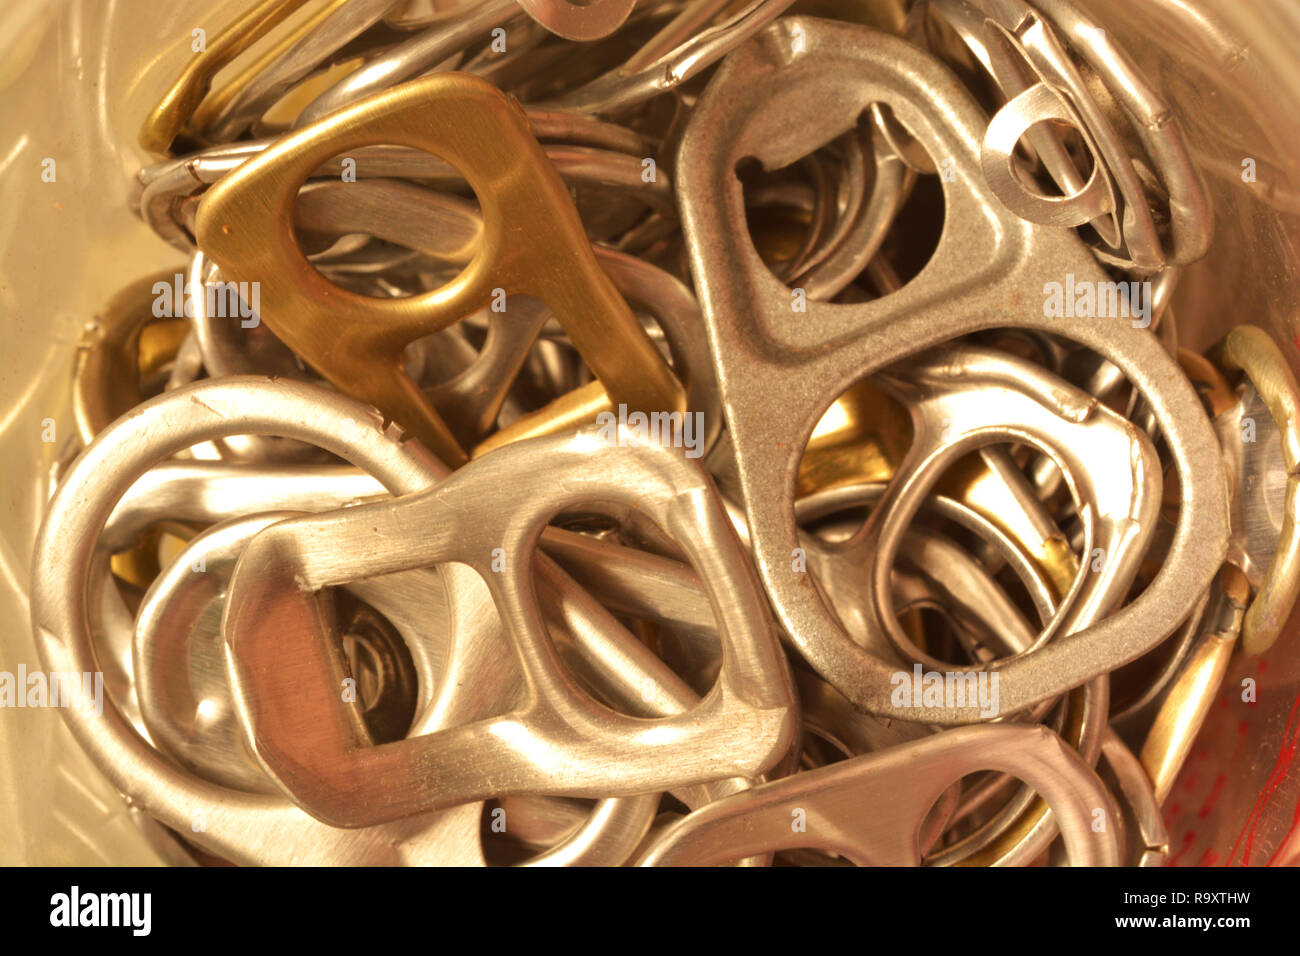 Background of many ring pull can opener, silver and gold. Stock Photo